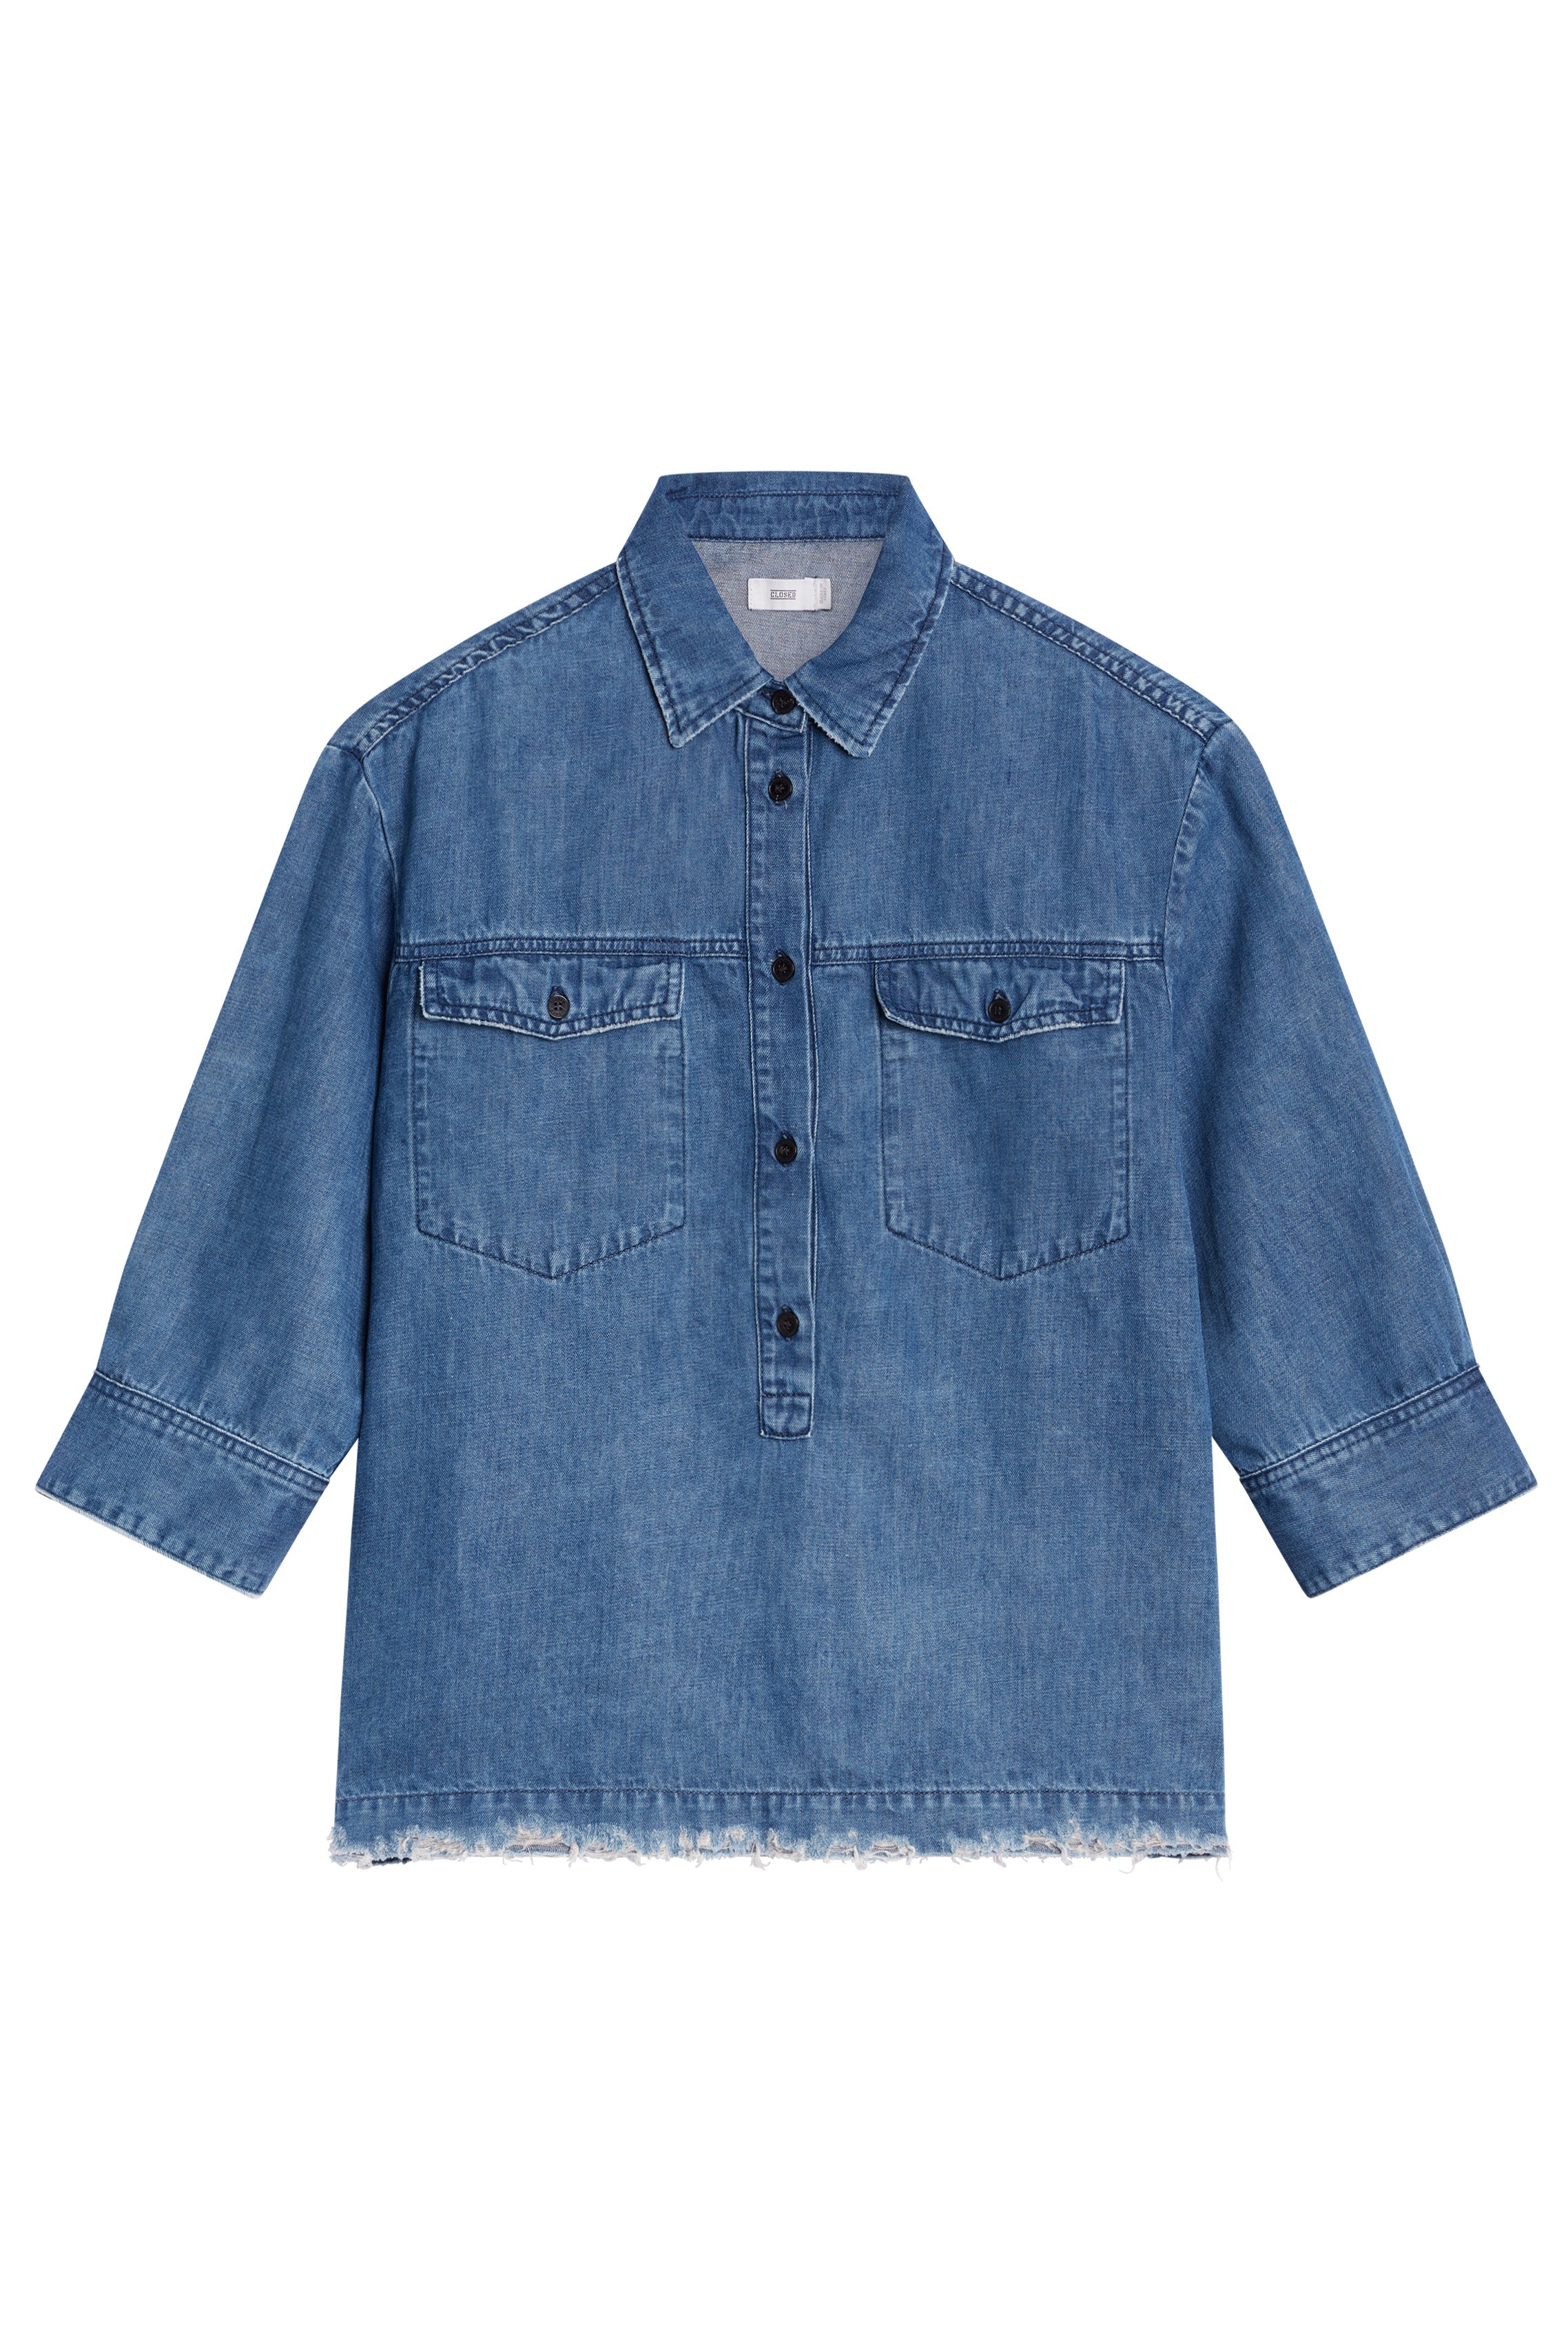 This denim top from Closed is a fashionable addition to any wardrobe. 